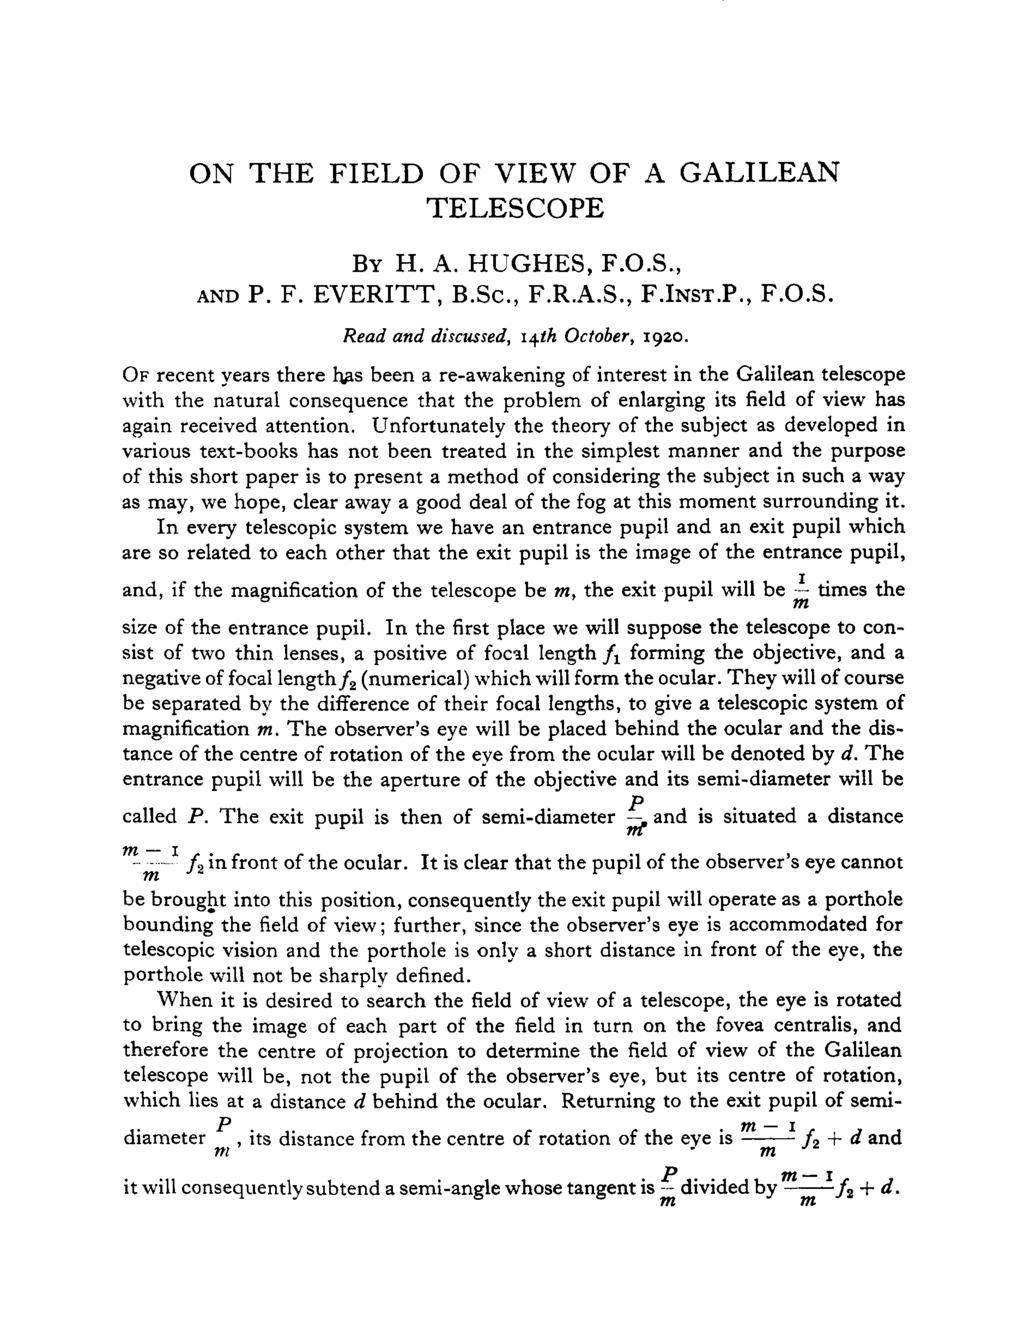 ON THE FIELD OF VIEW OF A GALILEAN TELESCOPE BY H. A. HUGHES, F.O.S., AND P. F. EVERITT, BSc., F.R.A.S., F.INsT.P., F.O.S. Read and discussed, 14th October, 1920.